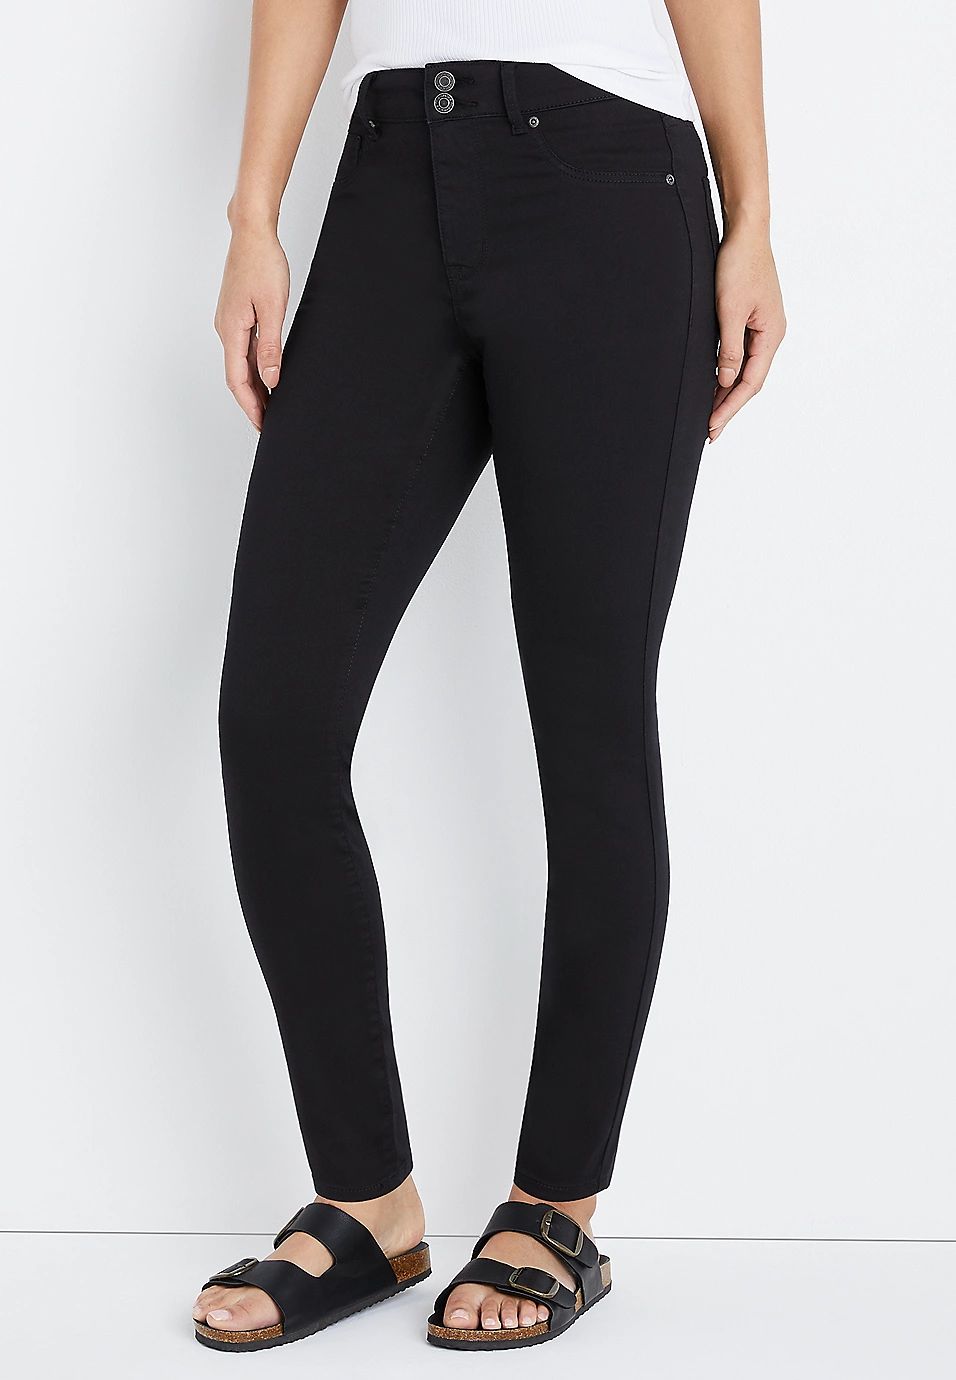 m jeans by maurices™ Black High Rise Double Button Jegging | Maurices